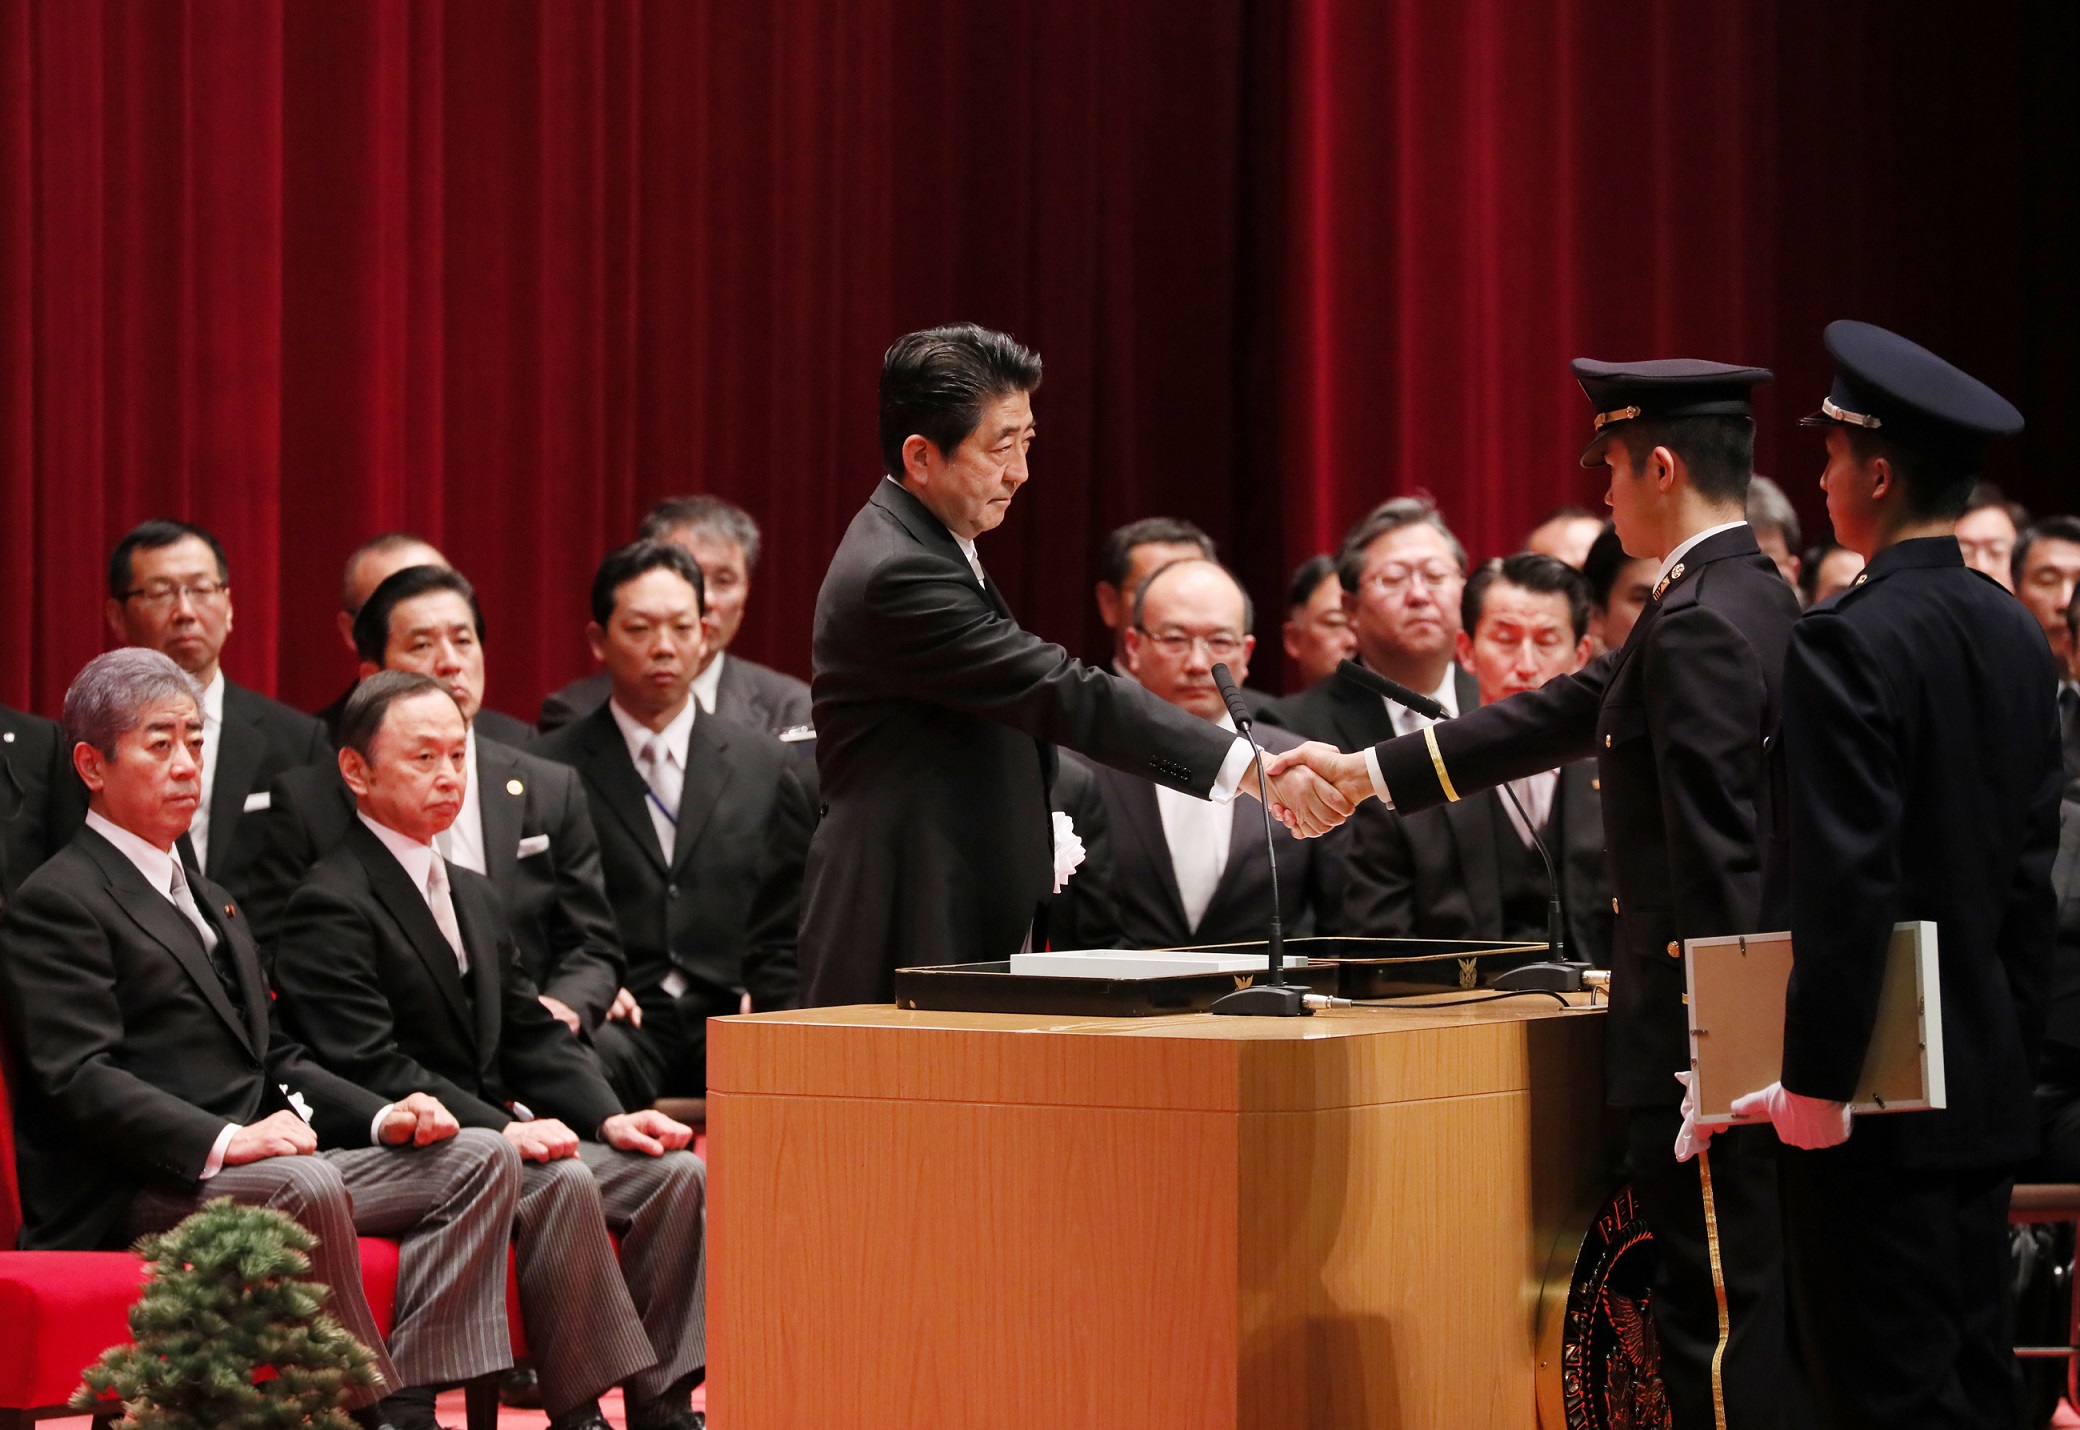 Photograph of the Prime Minister shaking hands during the oath of service ceremony